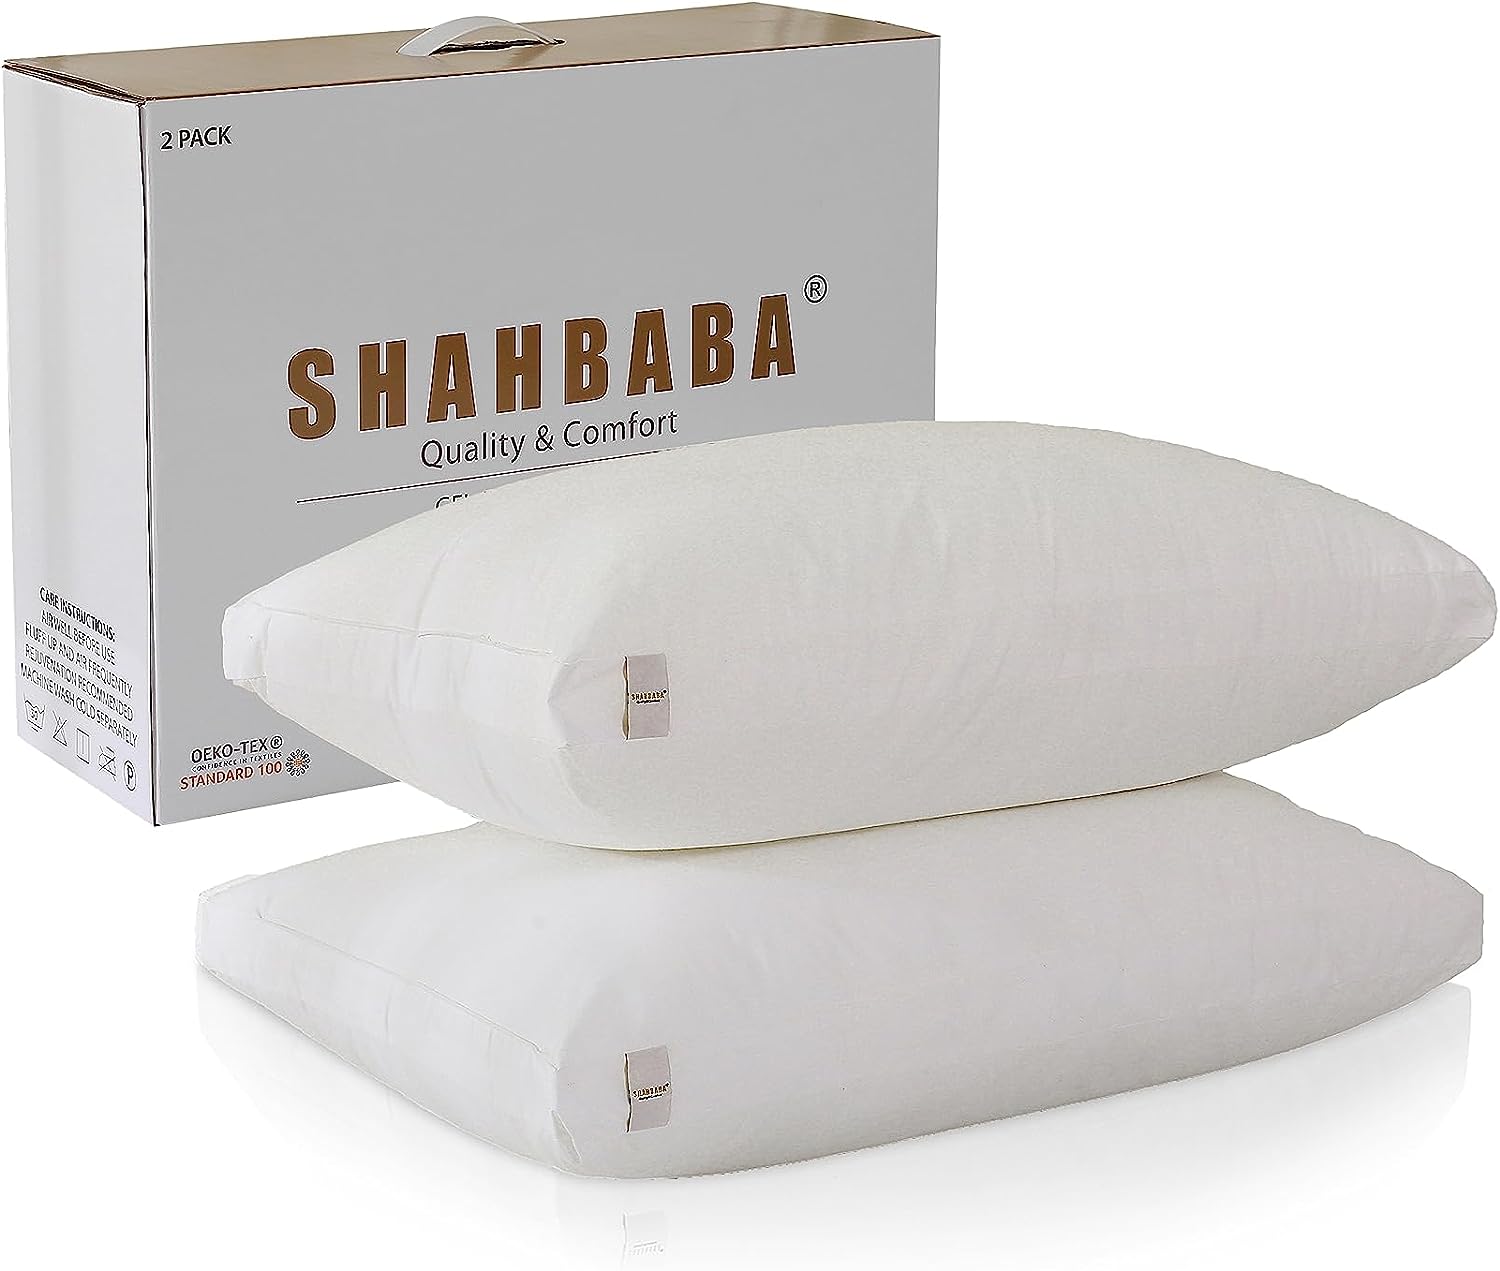 Exclusive Car Cushion Combo & Pillow Set for optimum Support